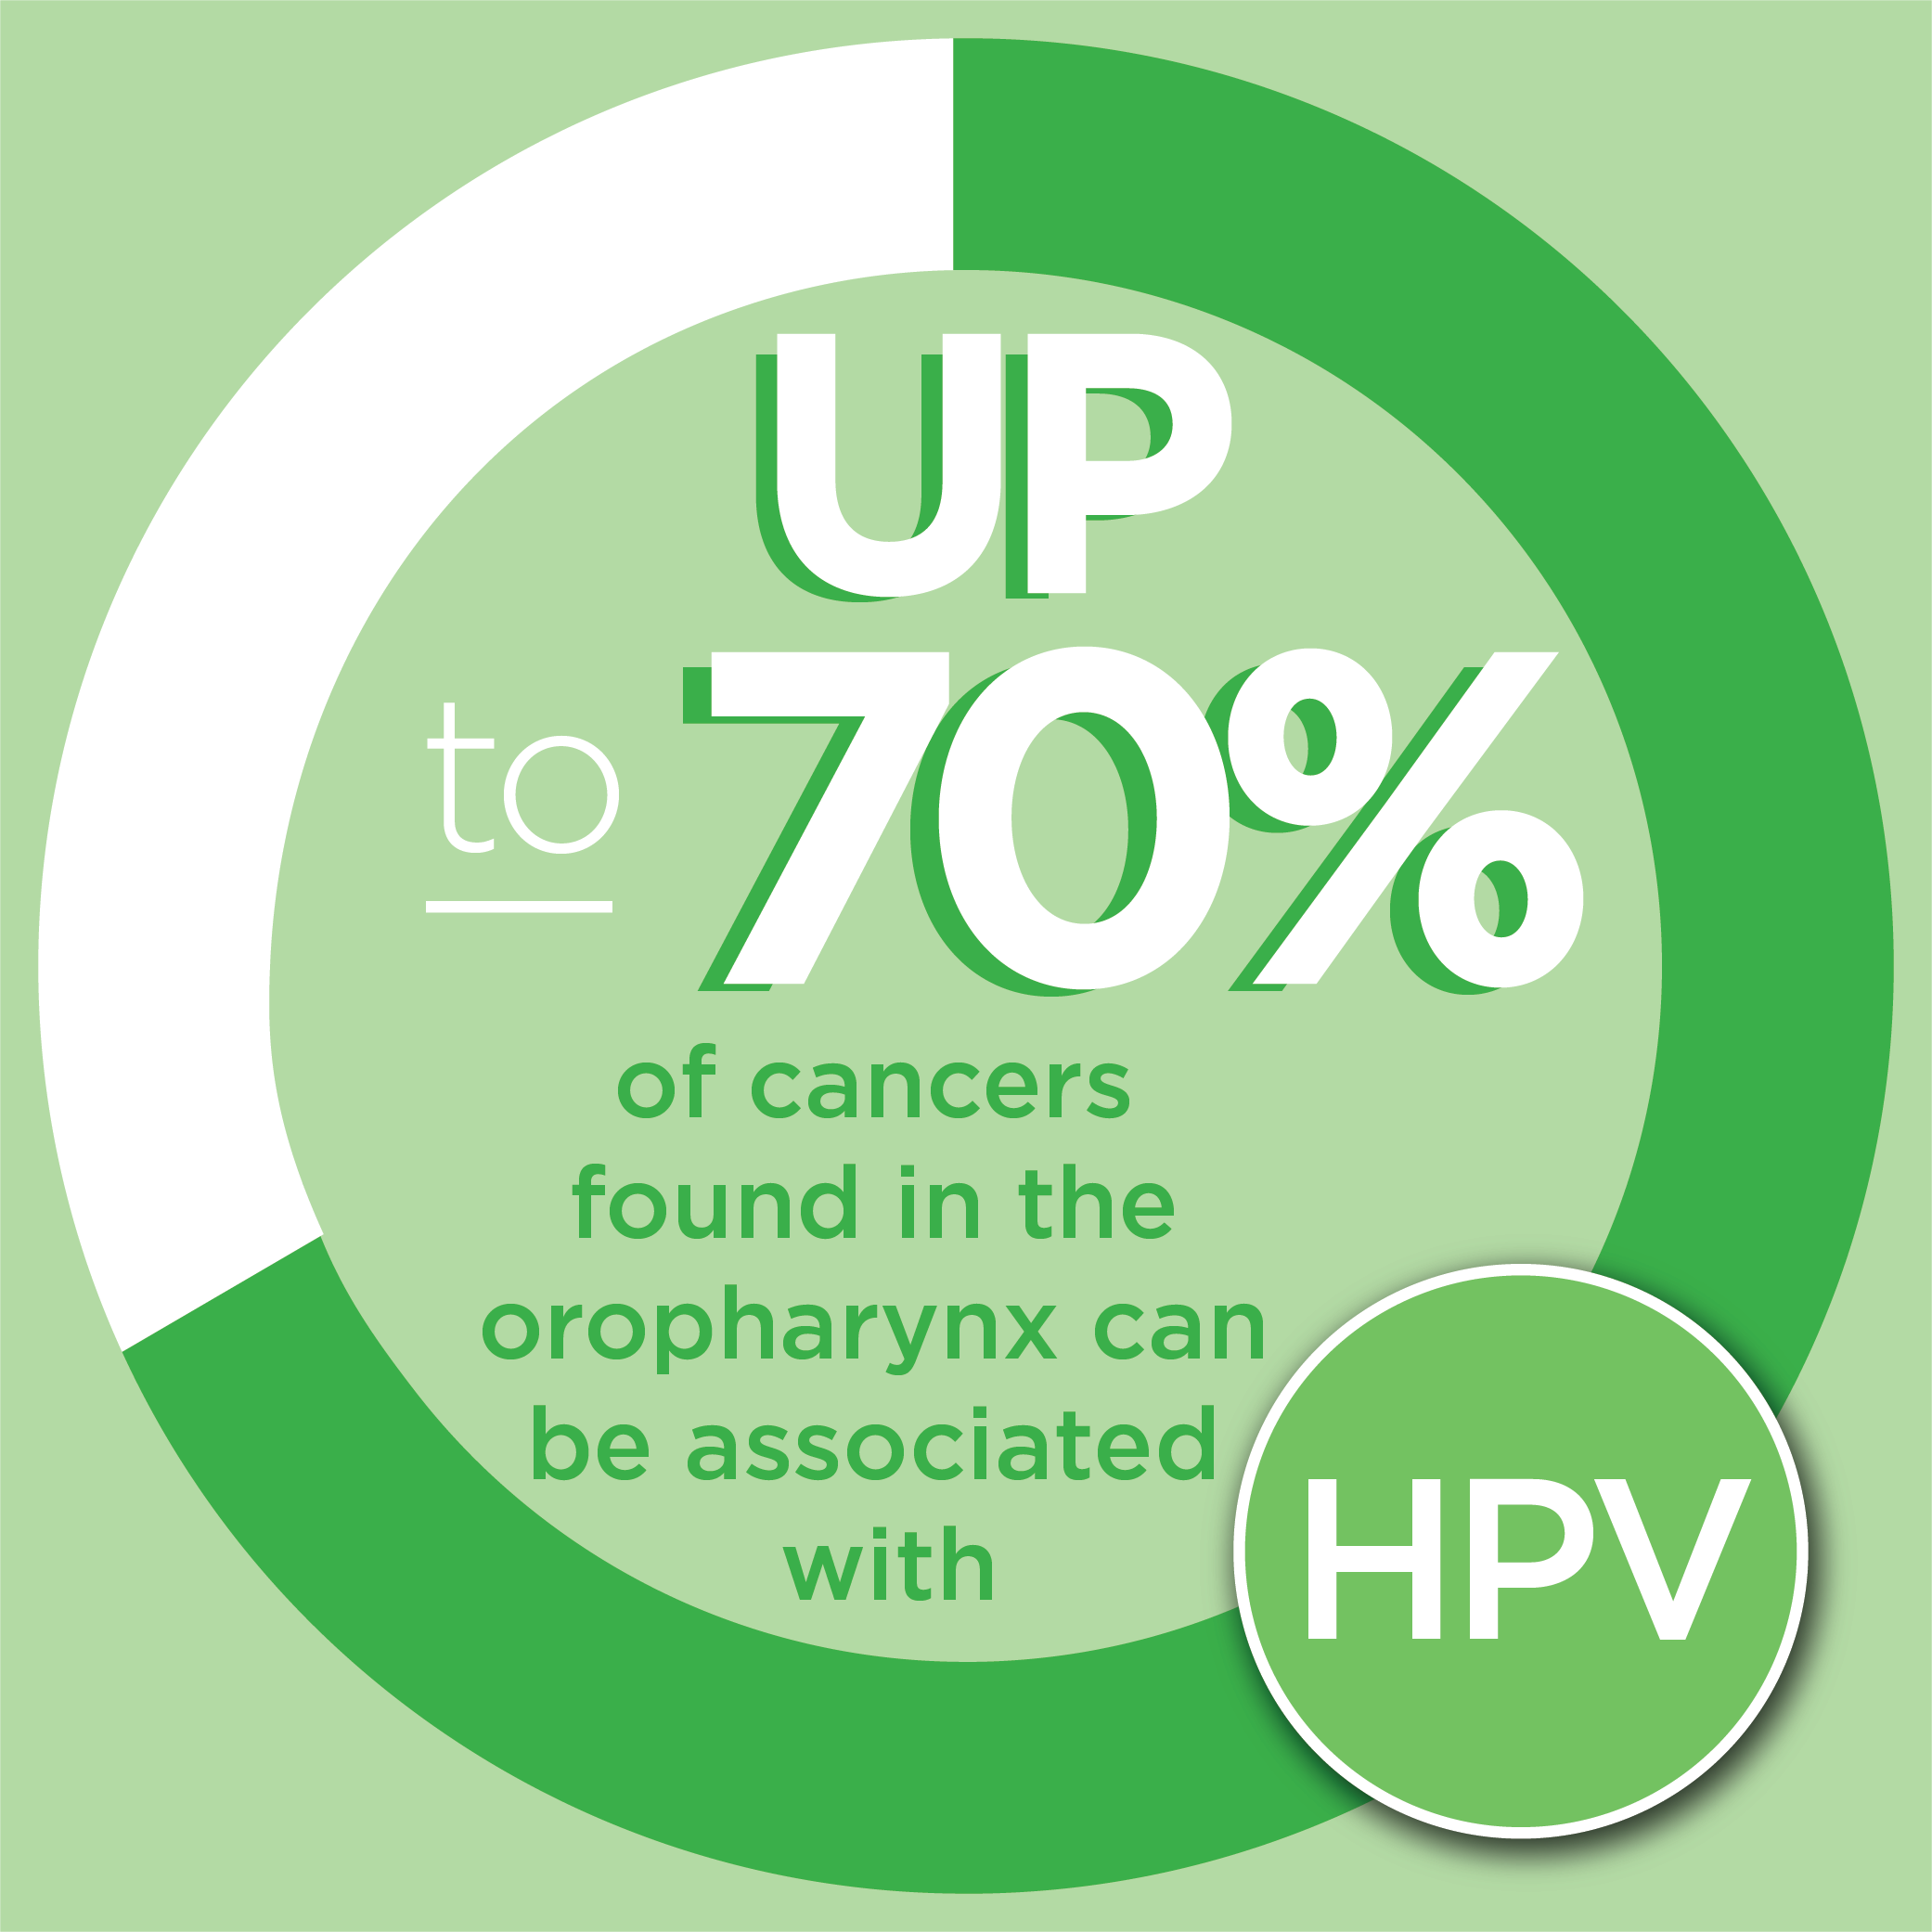 Green circle graphic "Up to 70% of cancers found in the oropharynx can be associated with HPV"